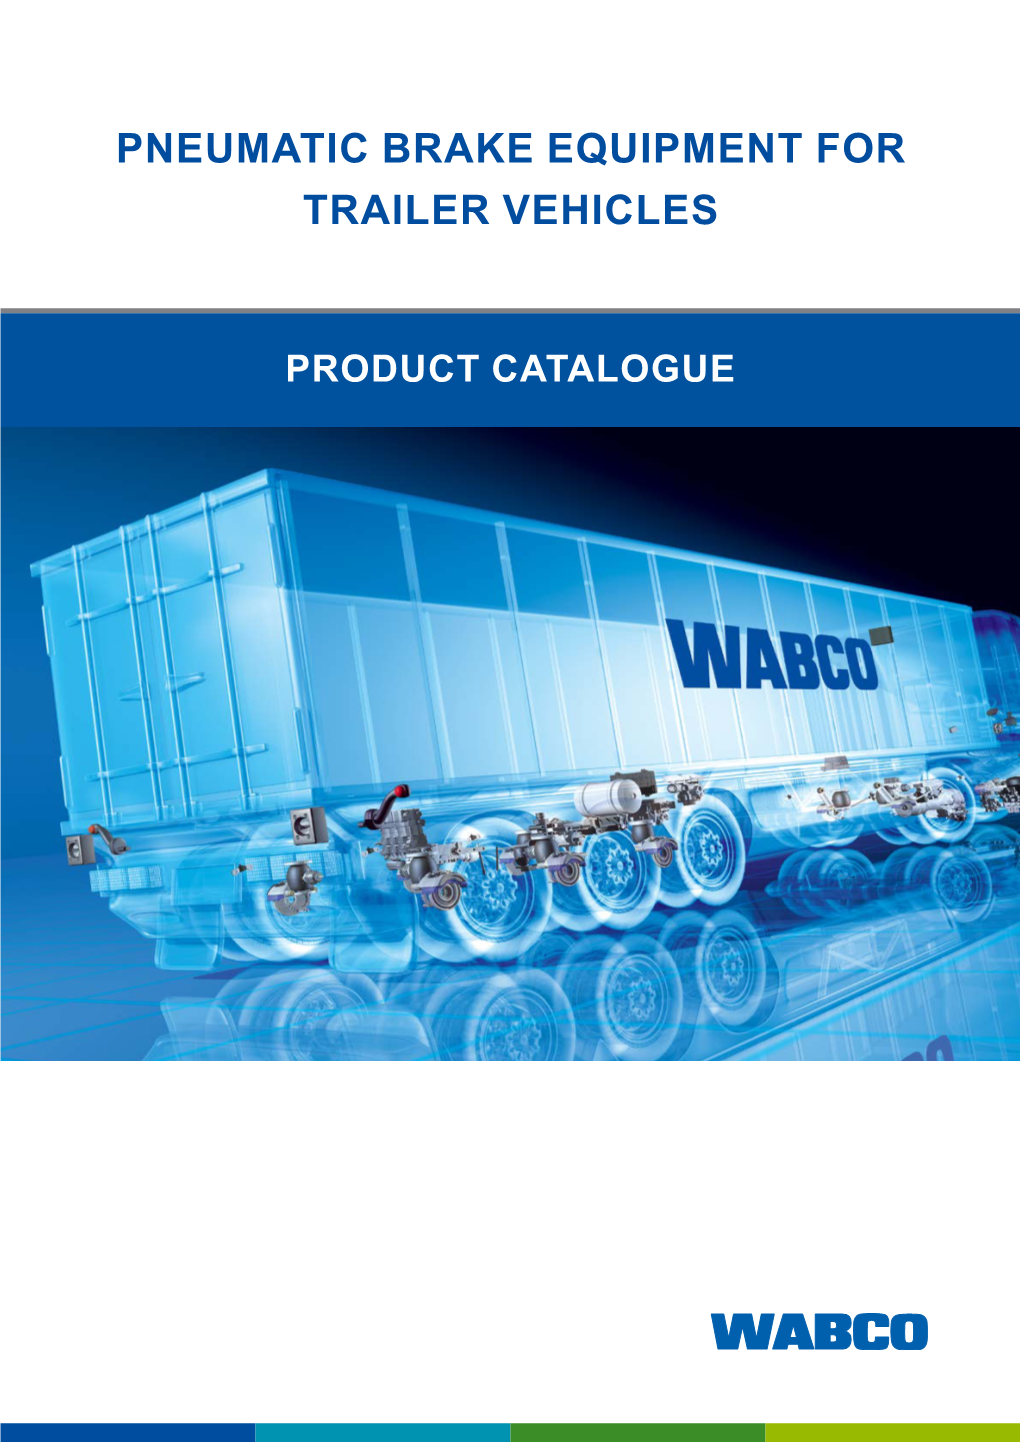 Pneumatic Brake Equipment for Trailer Vehicles Product Catalogue